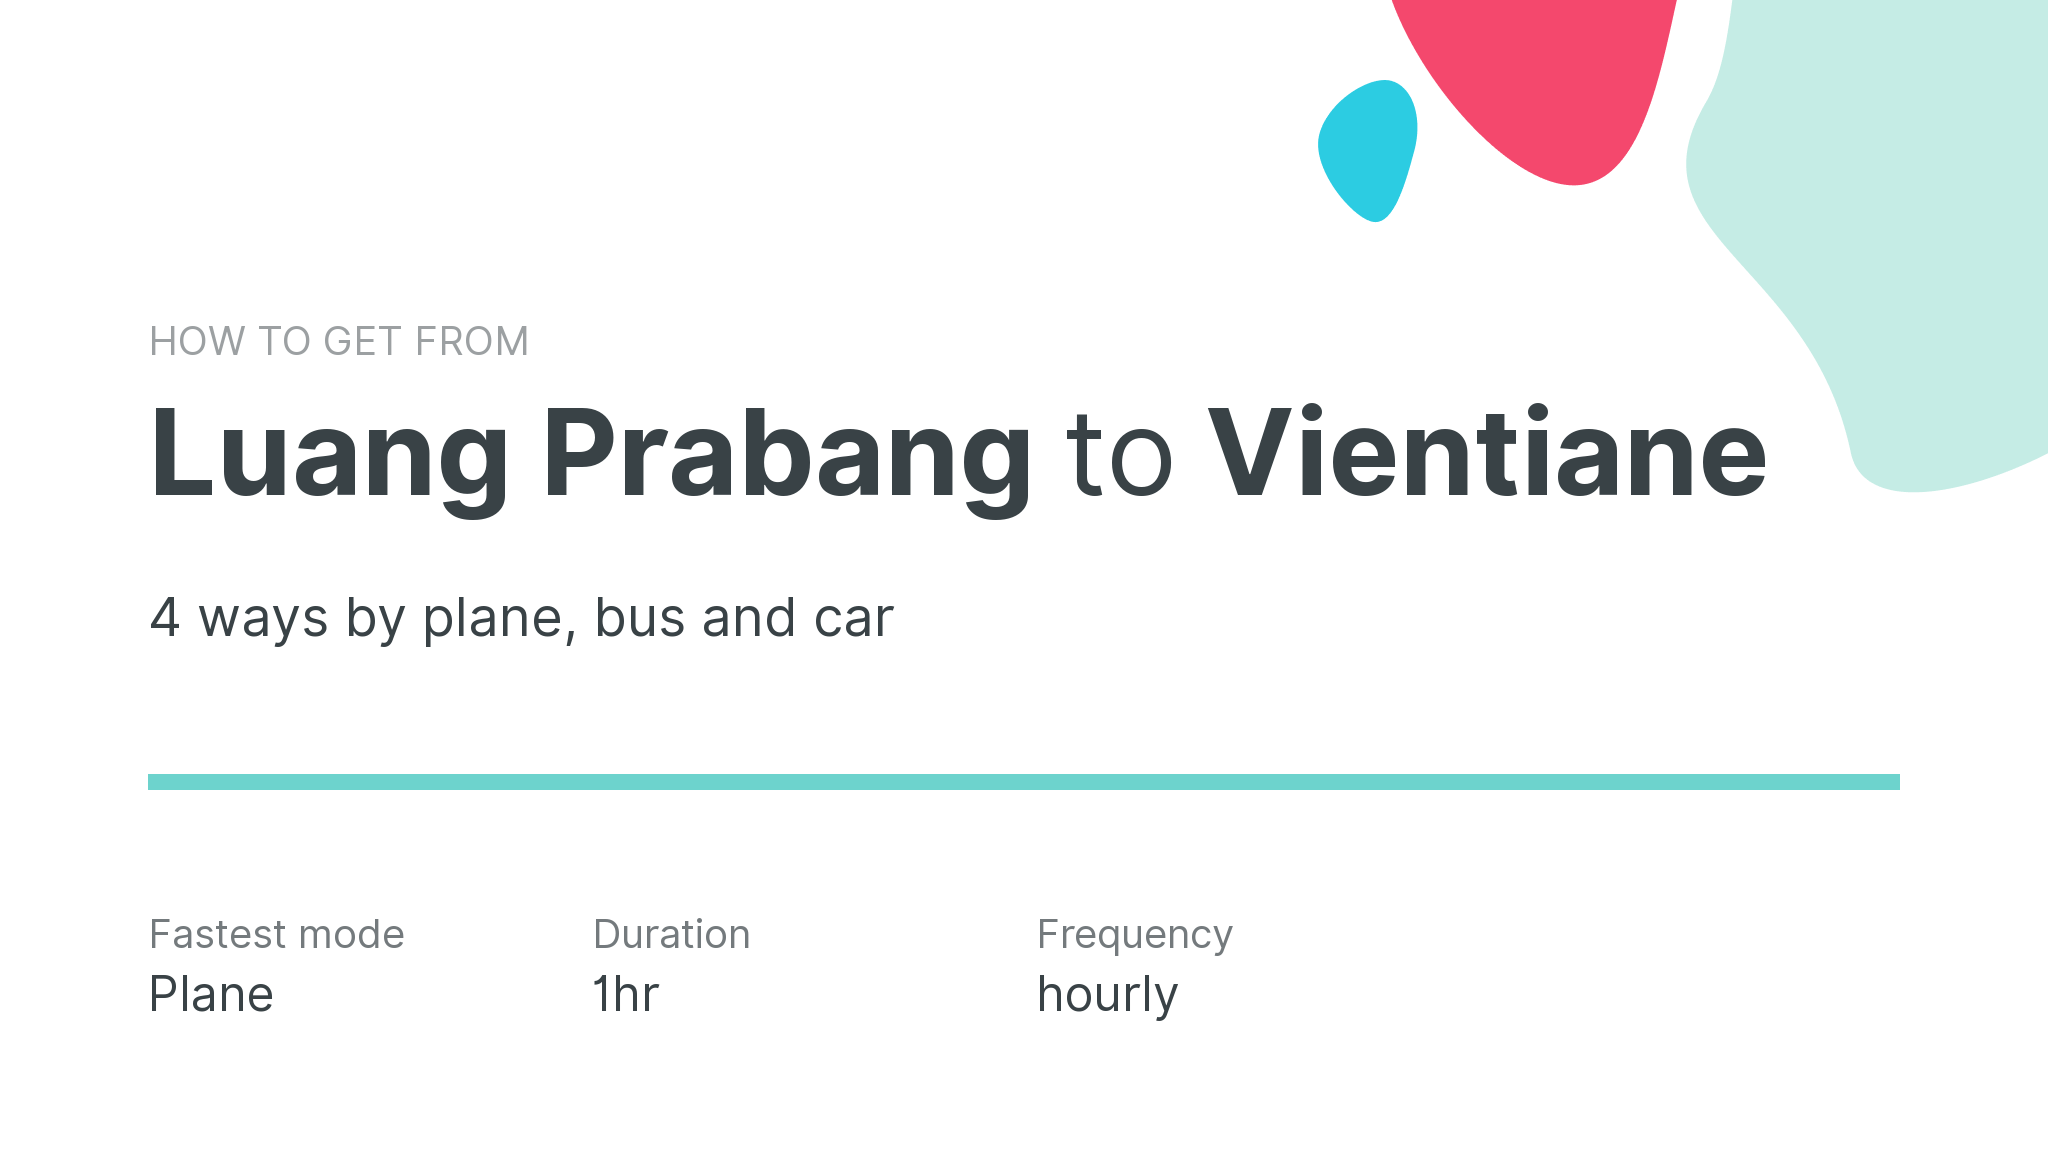 How do I get from Luang Prabang to Vientiane